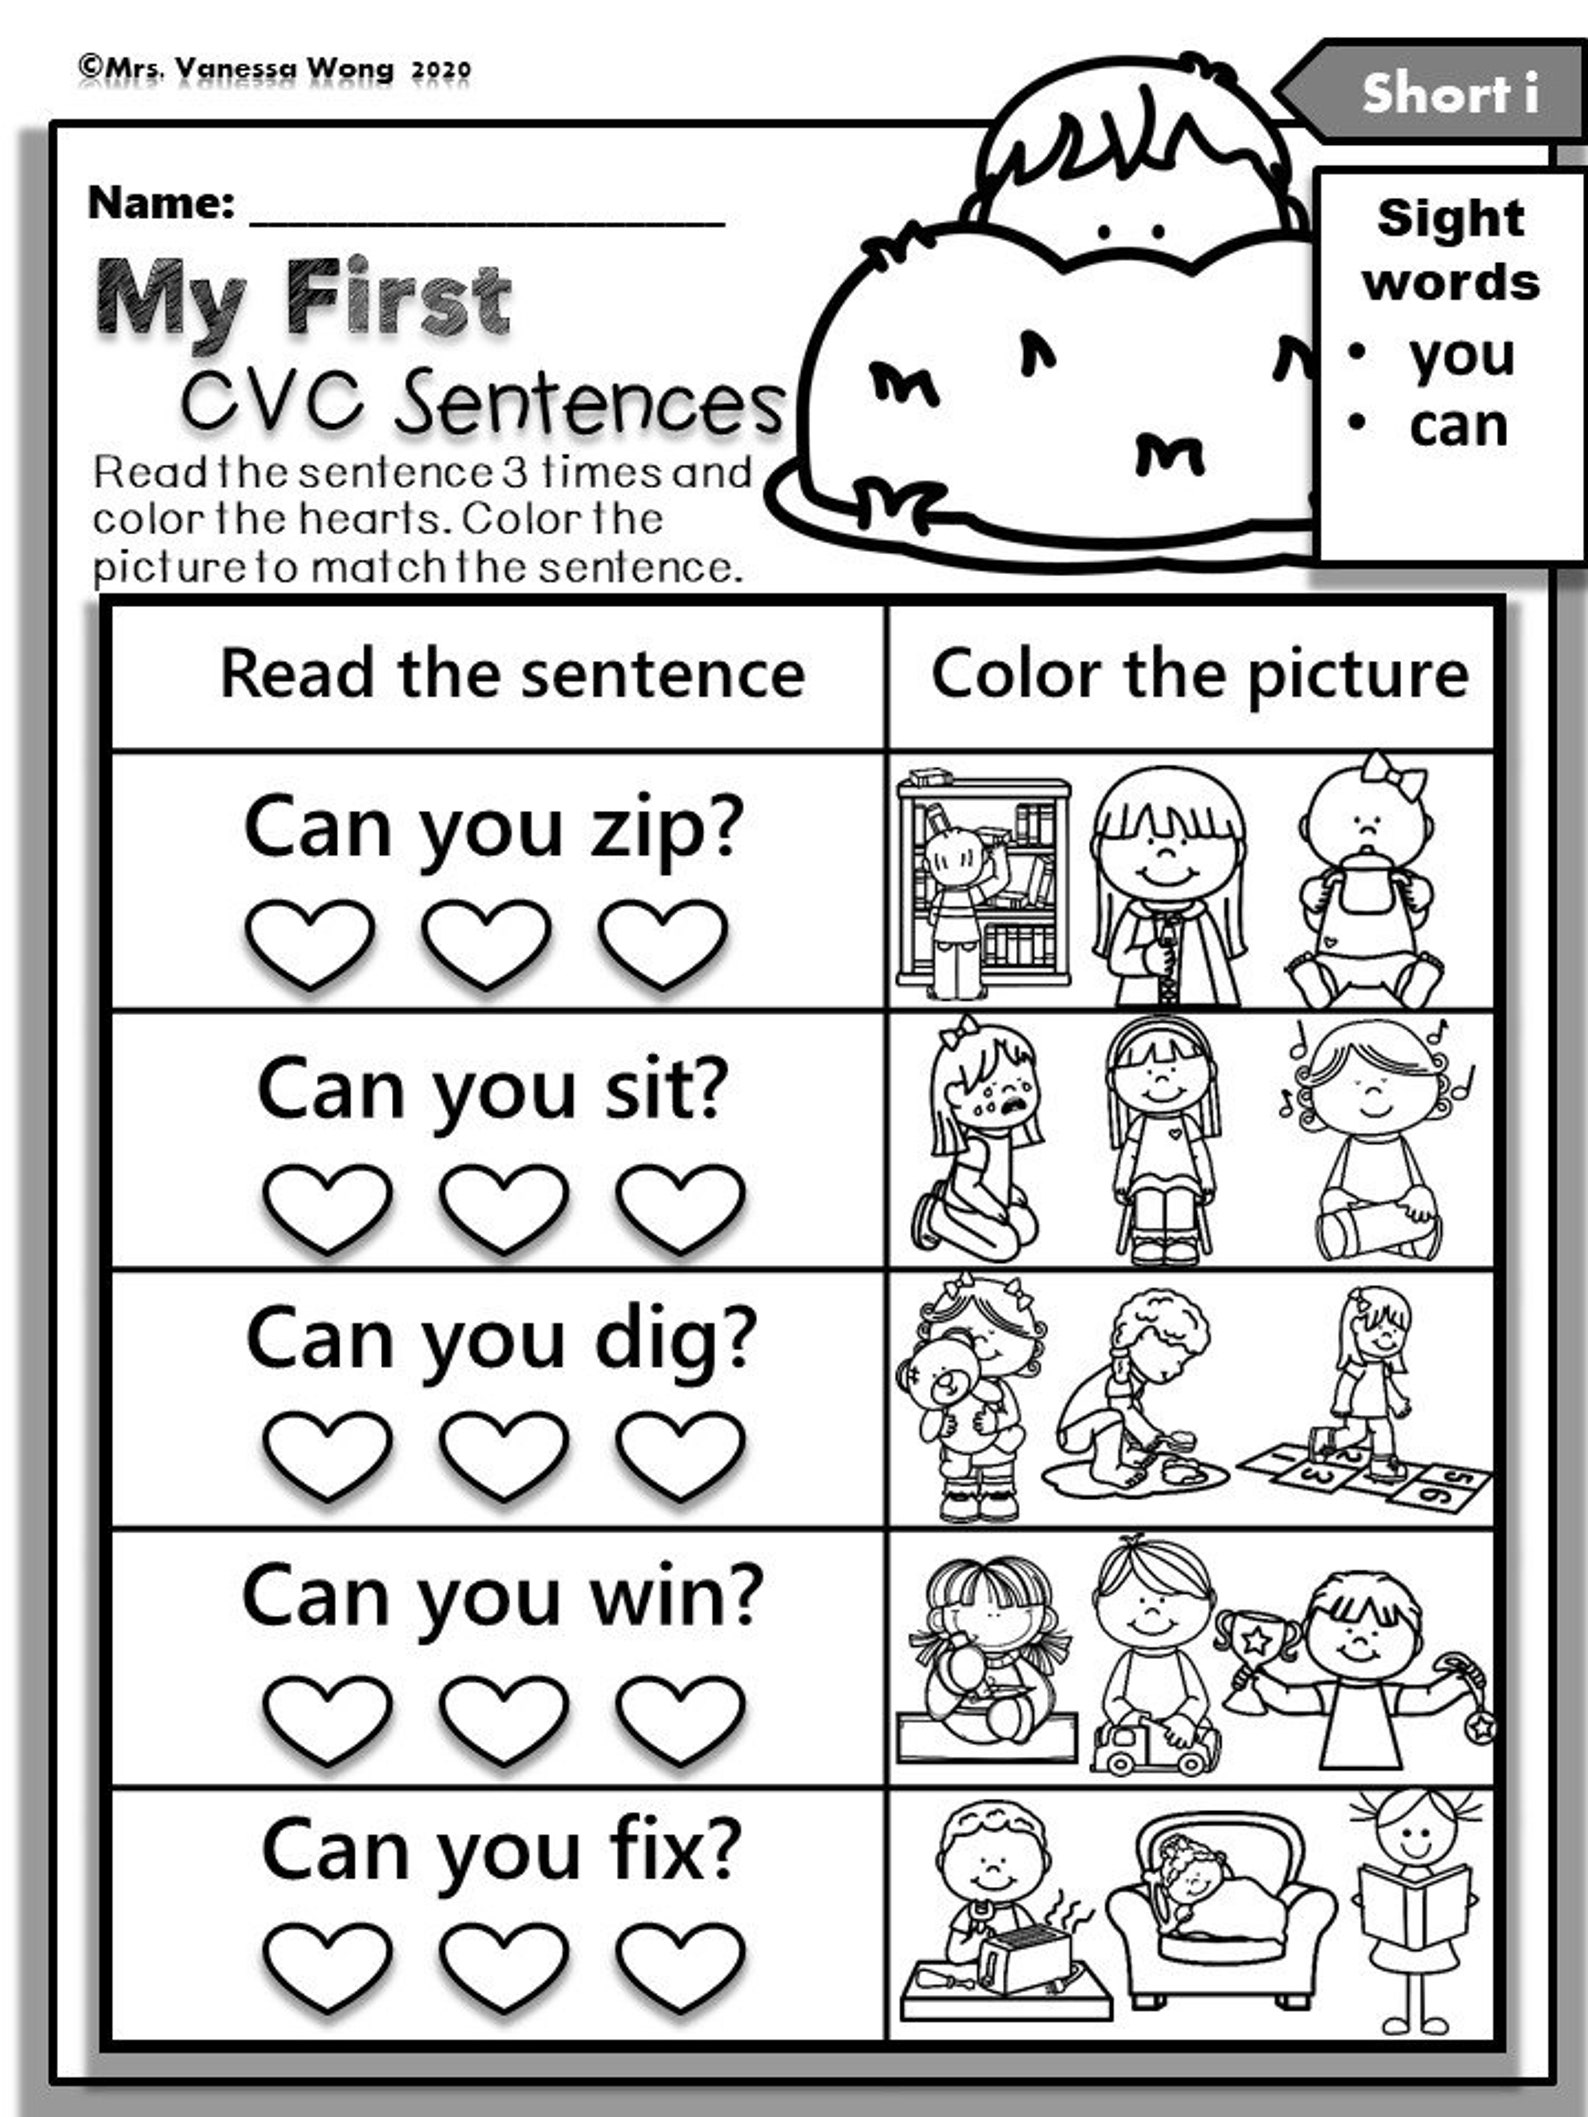 phonics-worksheets-my-first-cvc-sentences-for-kindergarten-and-first-grade-etsy